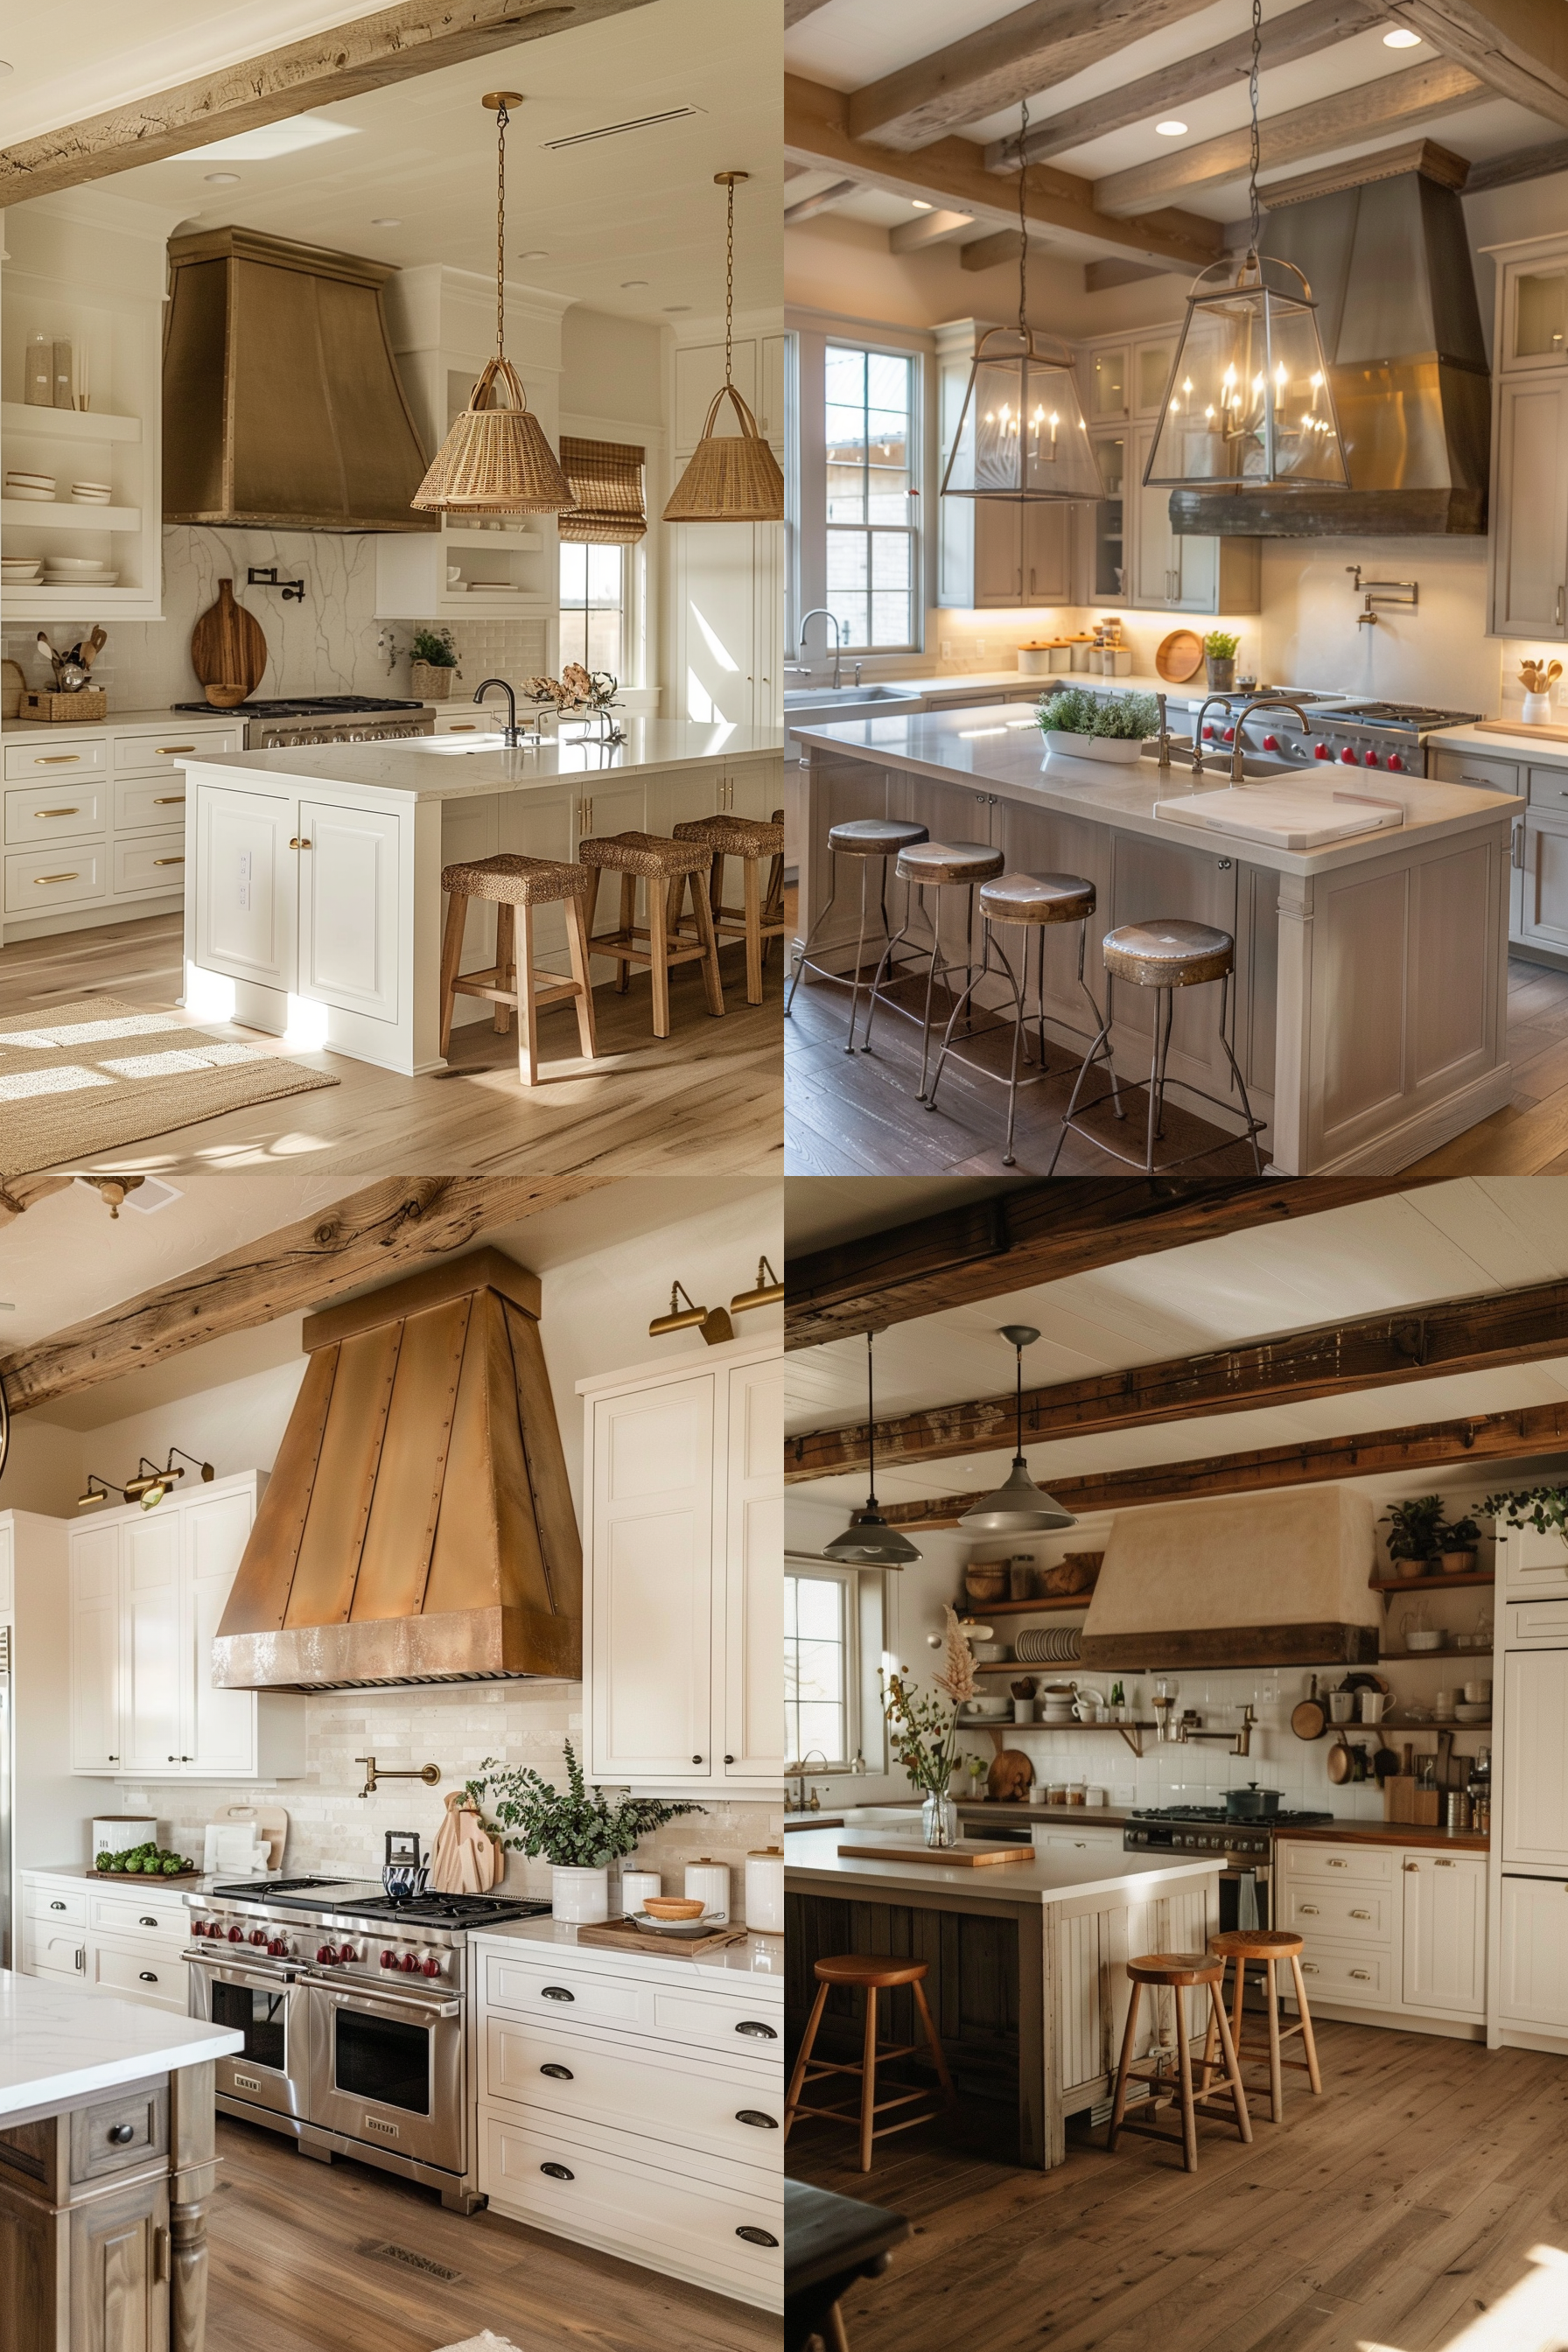 Collage of four cozy kitchen interior images with rustic wooden beams, copper hood, and farmhouse decor.